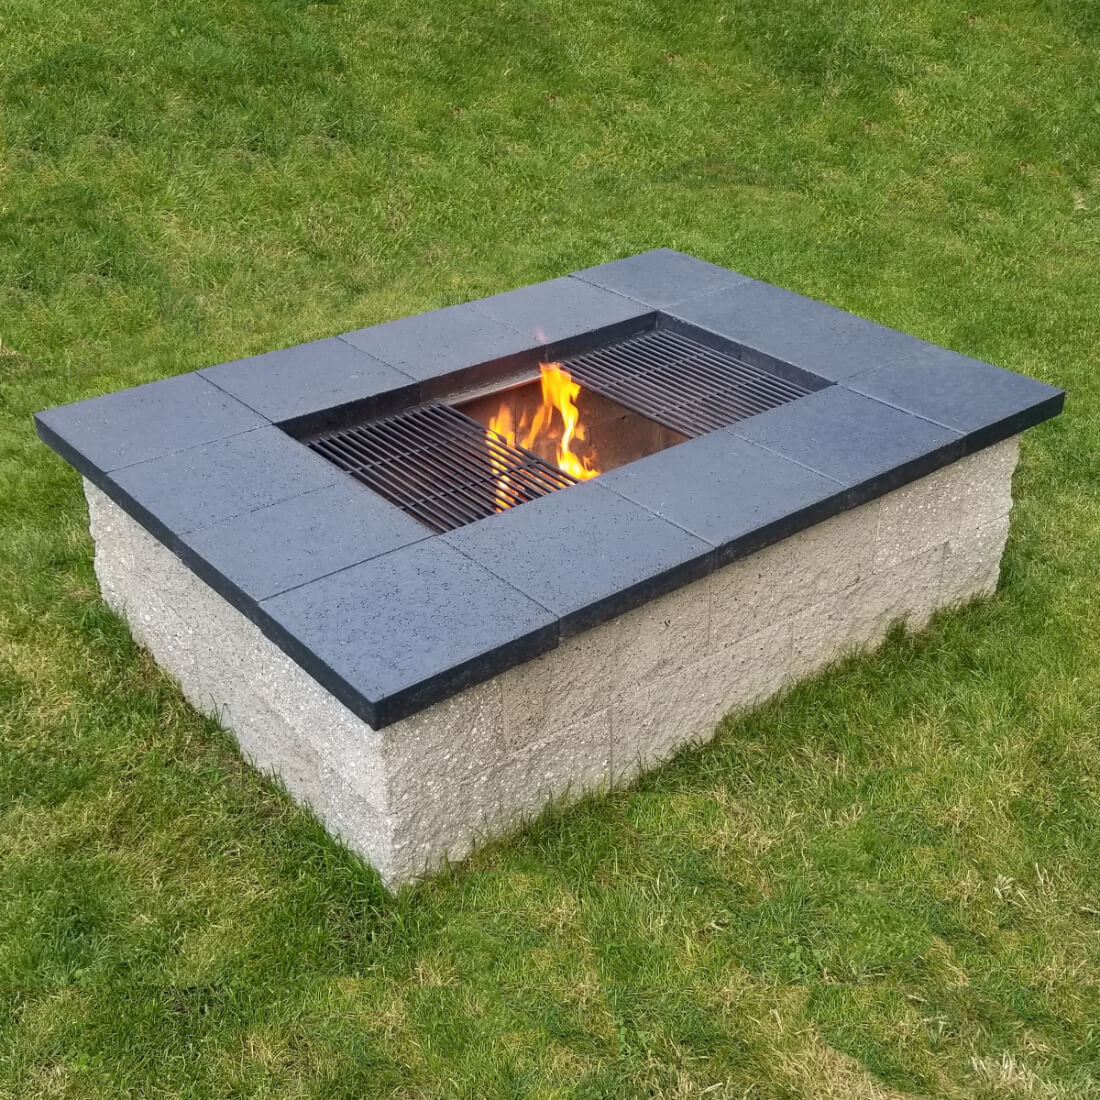 Outdoor Fireplaces & Fire Pits - We Sell And Install Top Brands Of Fire Pits